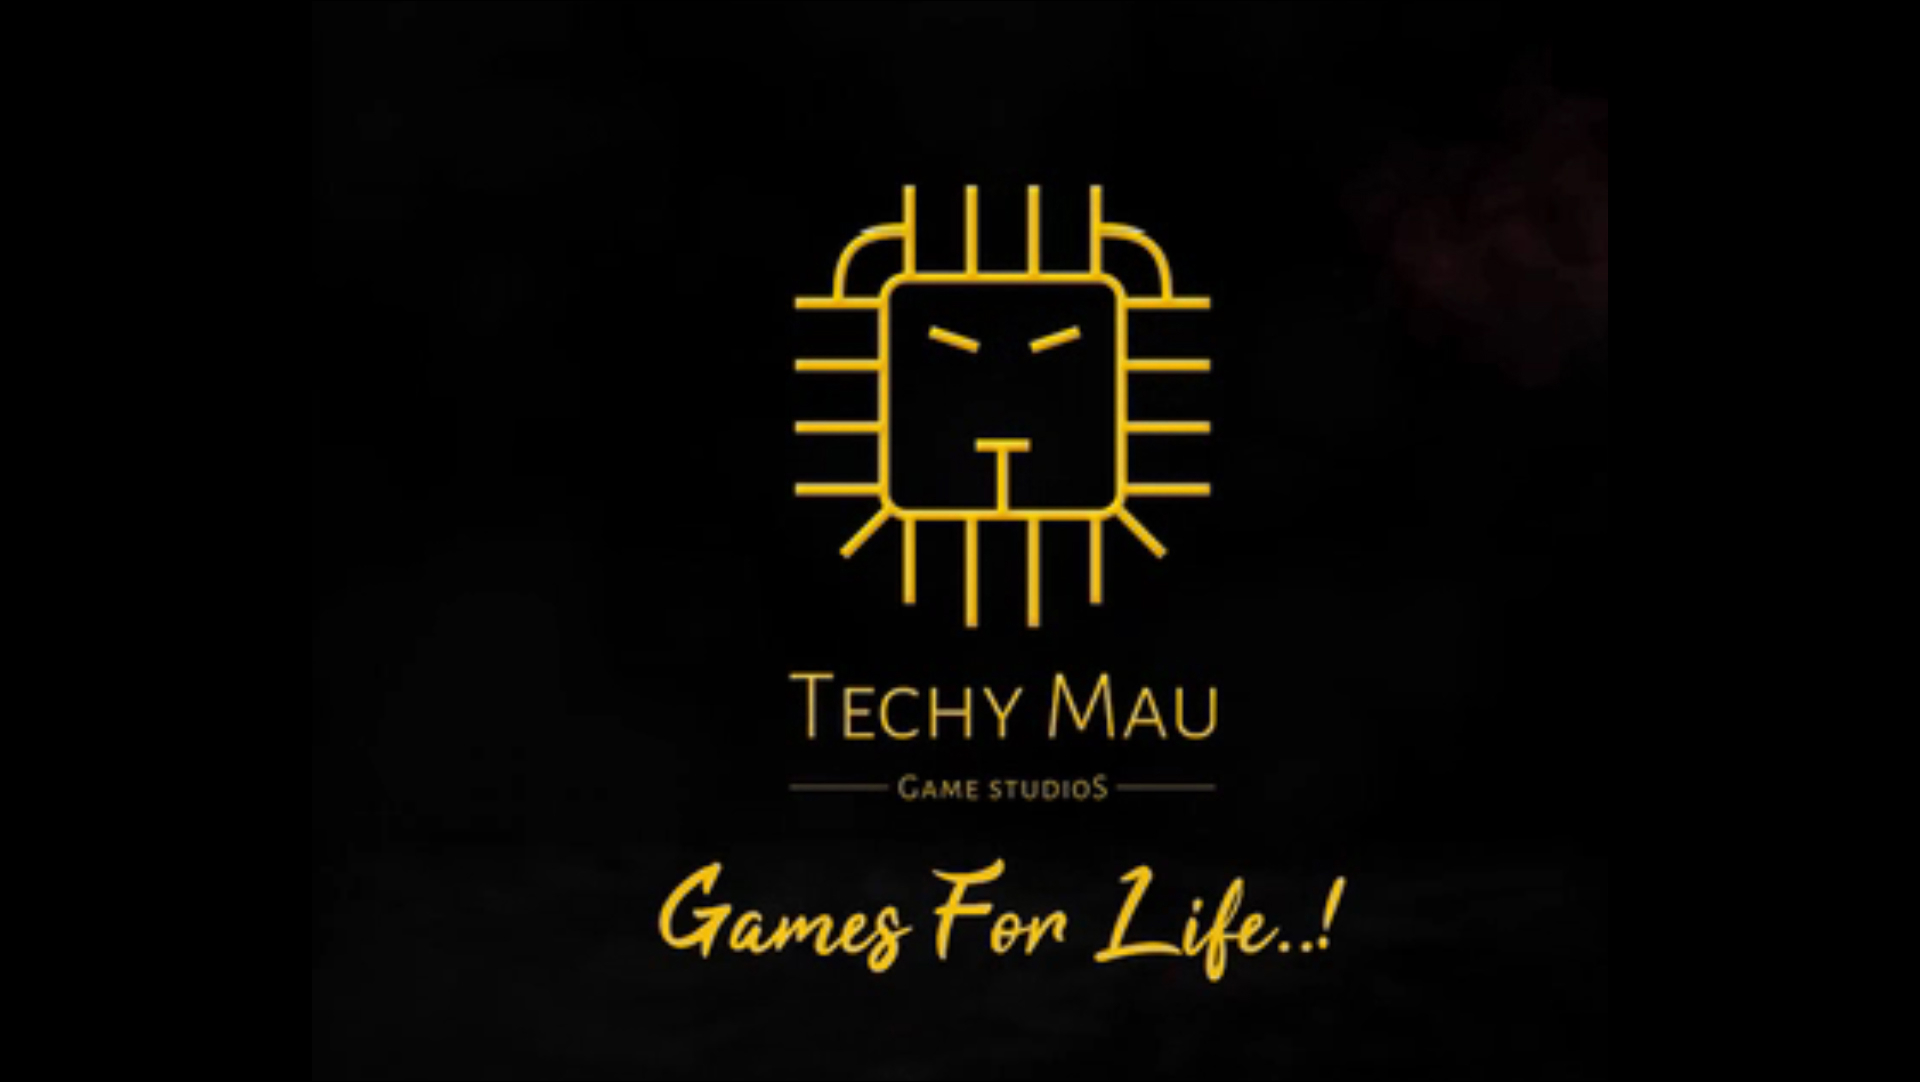 Techymau: The company is known for its Incredible Games!